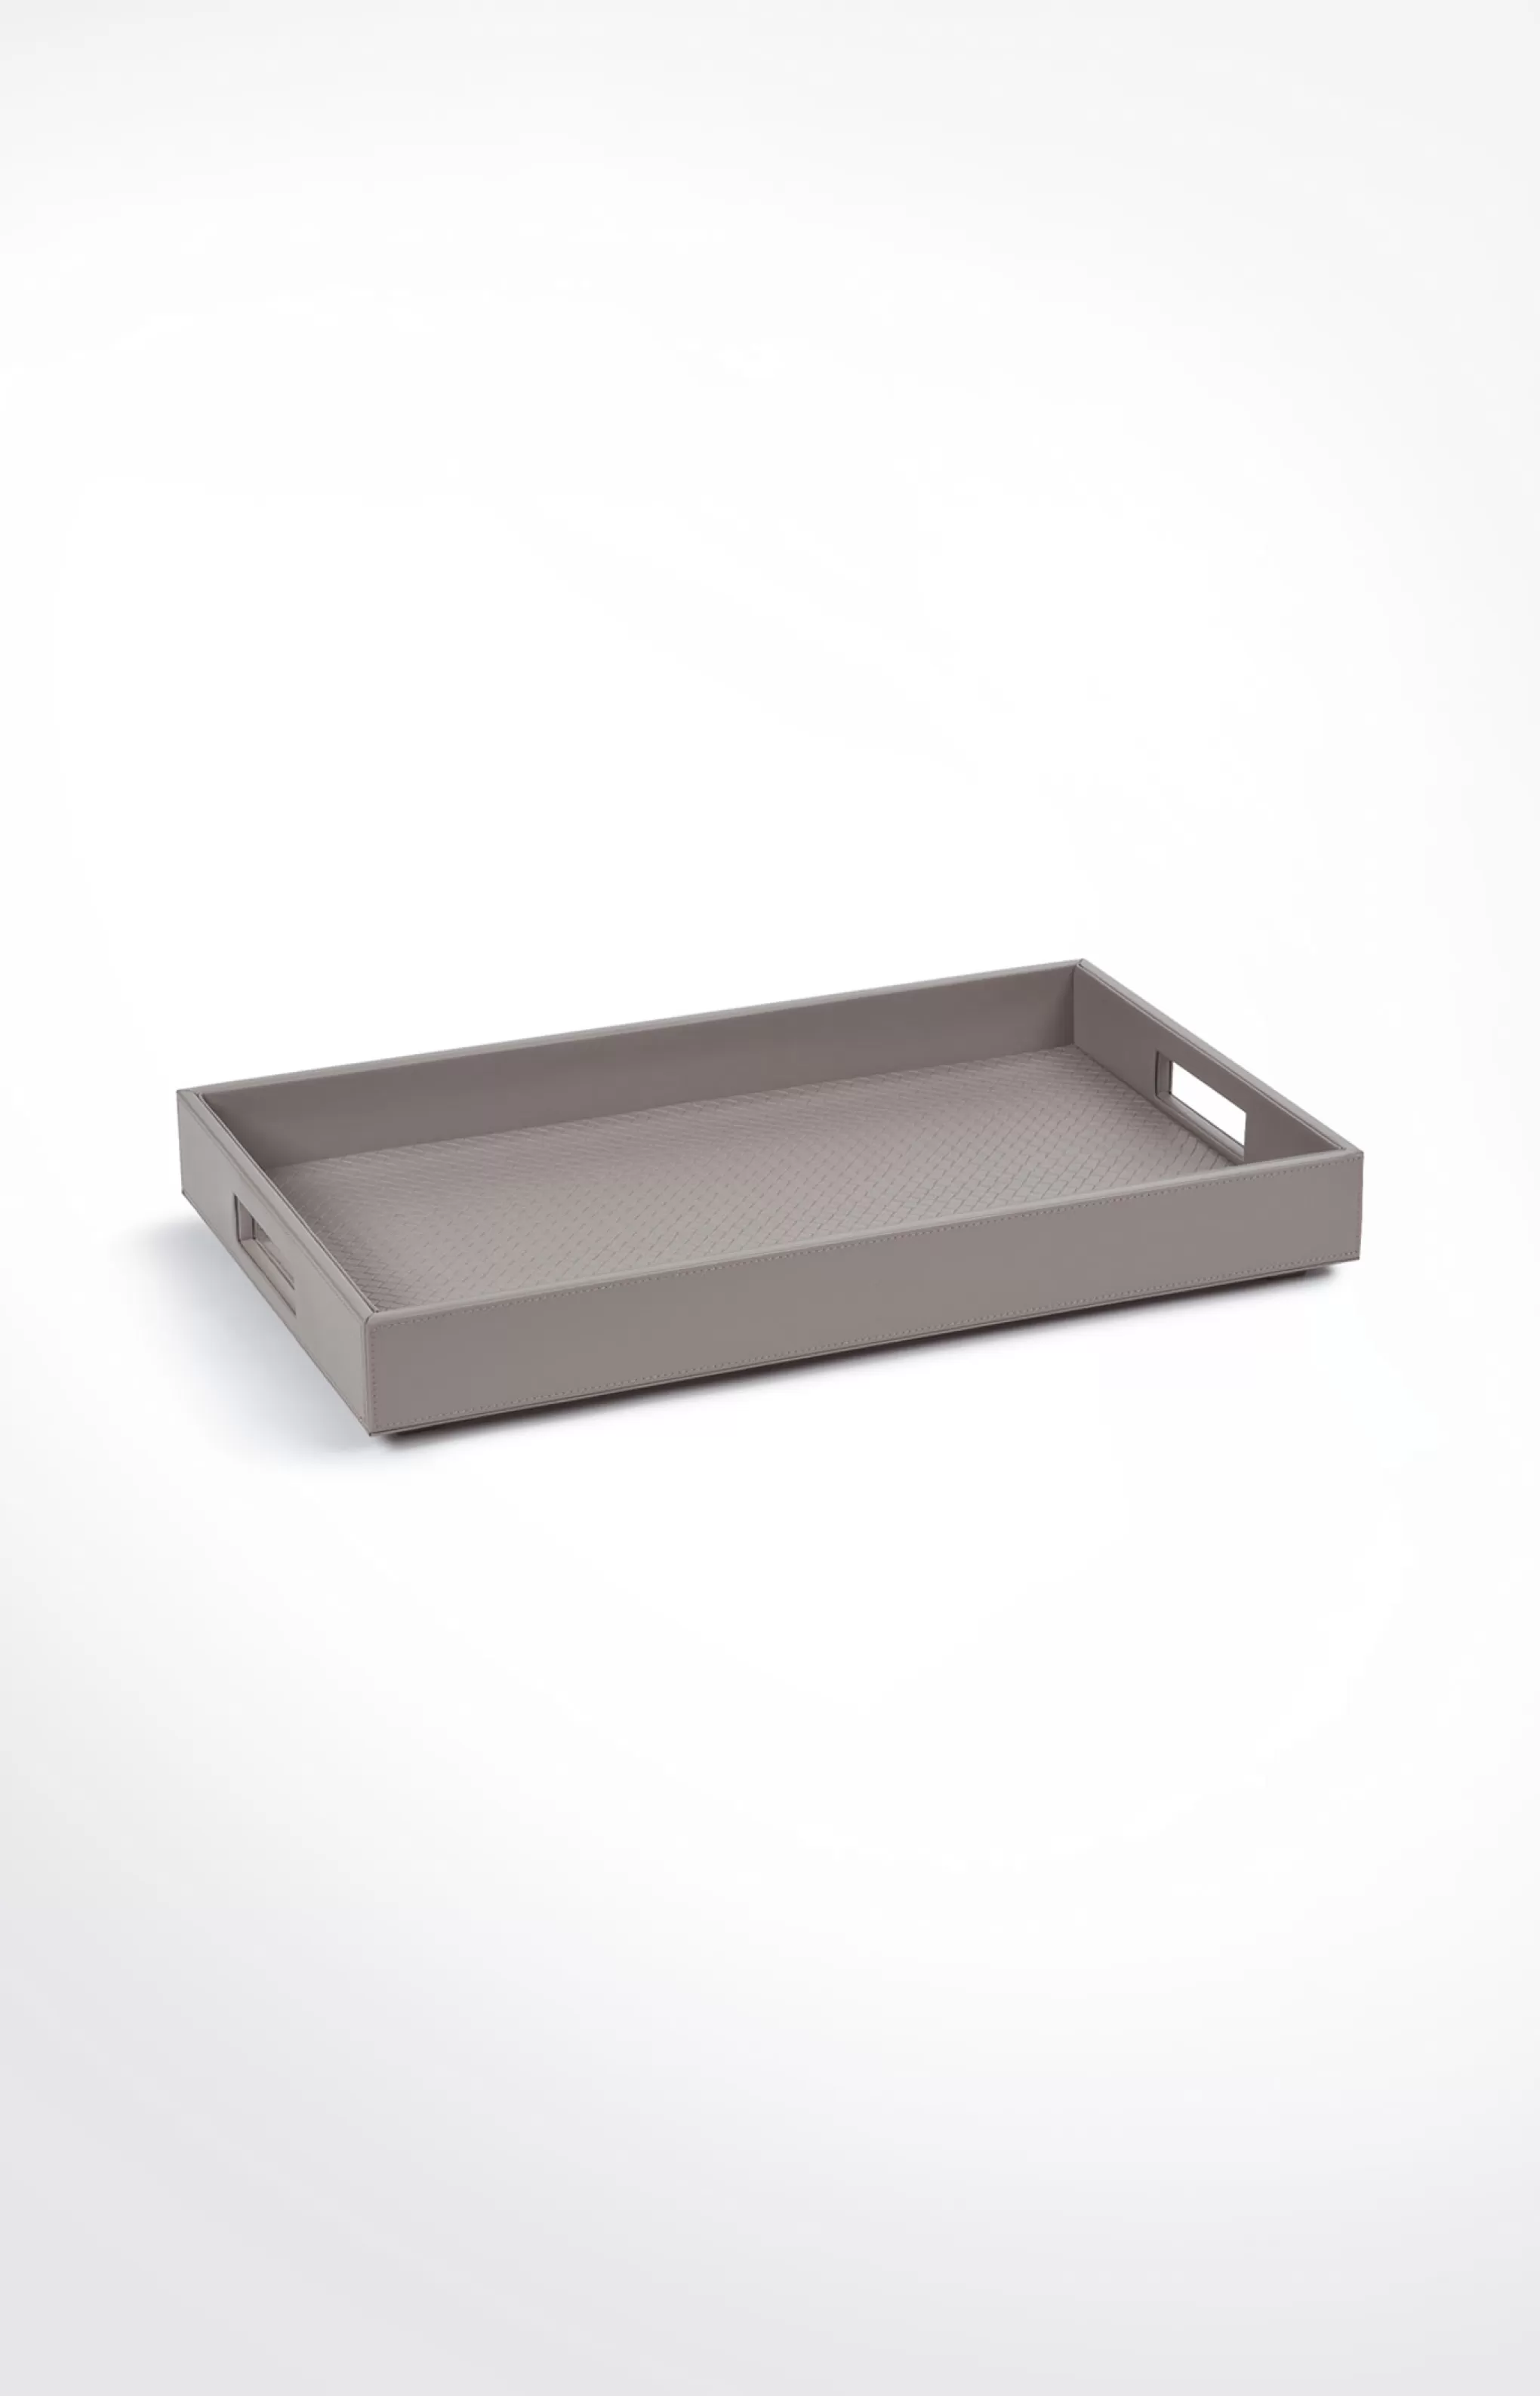 Bathroom Accessories | Discover Everything | Home Accessories | Table Accessories*JOOP Bathroom Accessories | Discover Everything | Home Accessories | Table Accessories Homeline tray, grey-rosé